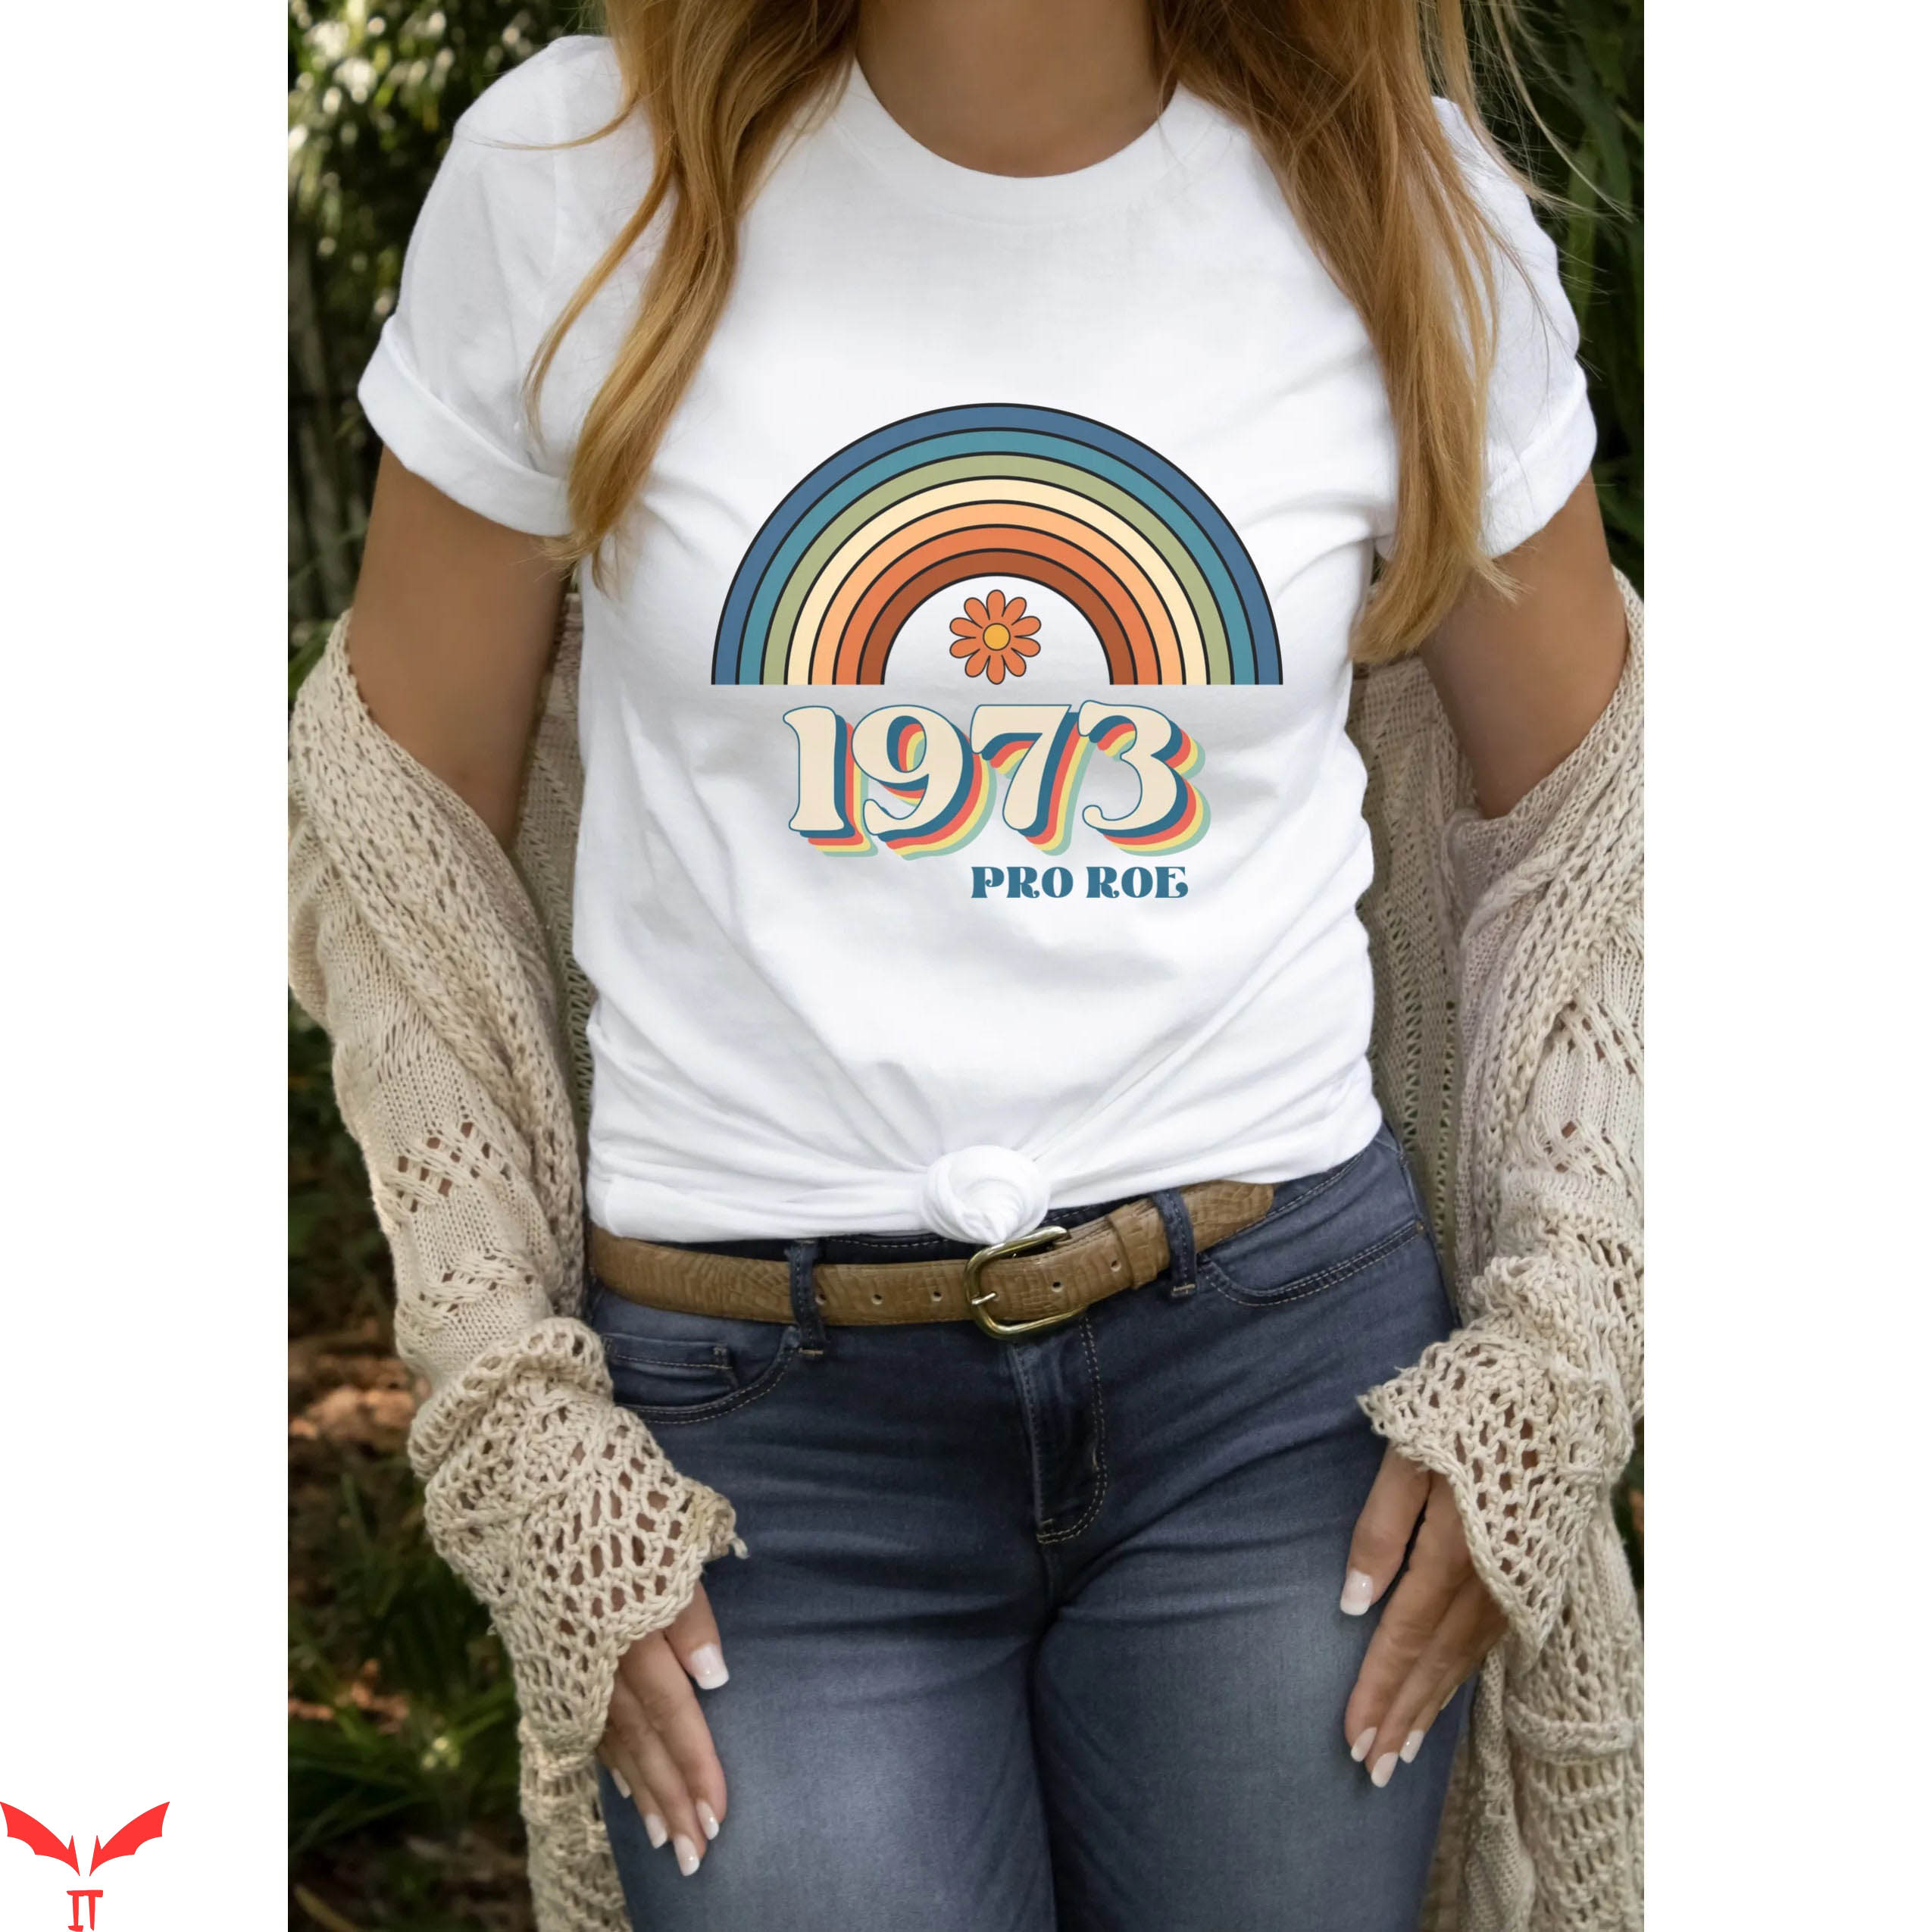 Pro Roe T-Shirt 1973 Cool Graphic Pro Choice Women's Rights